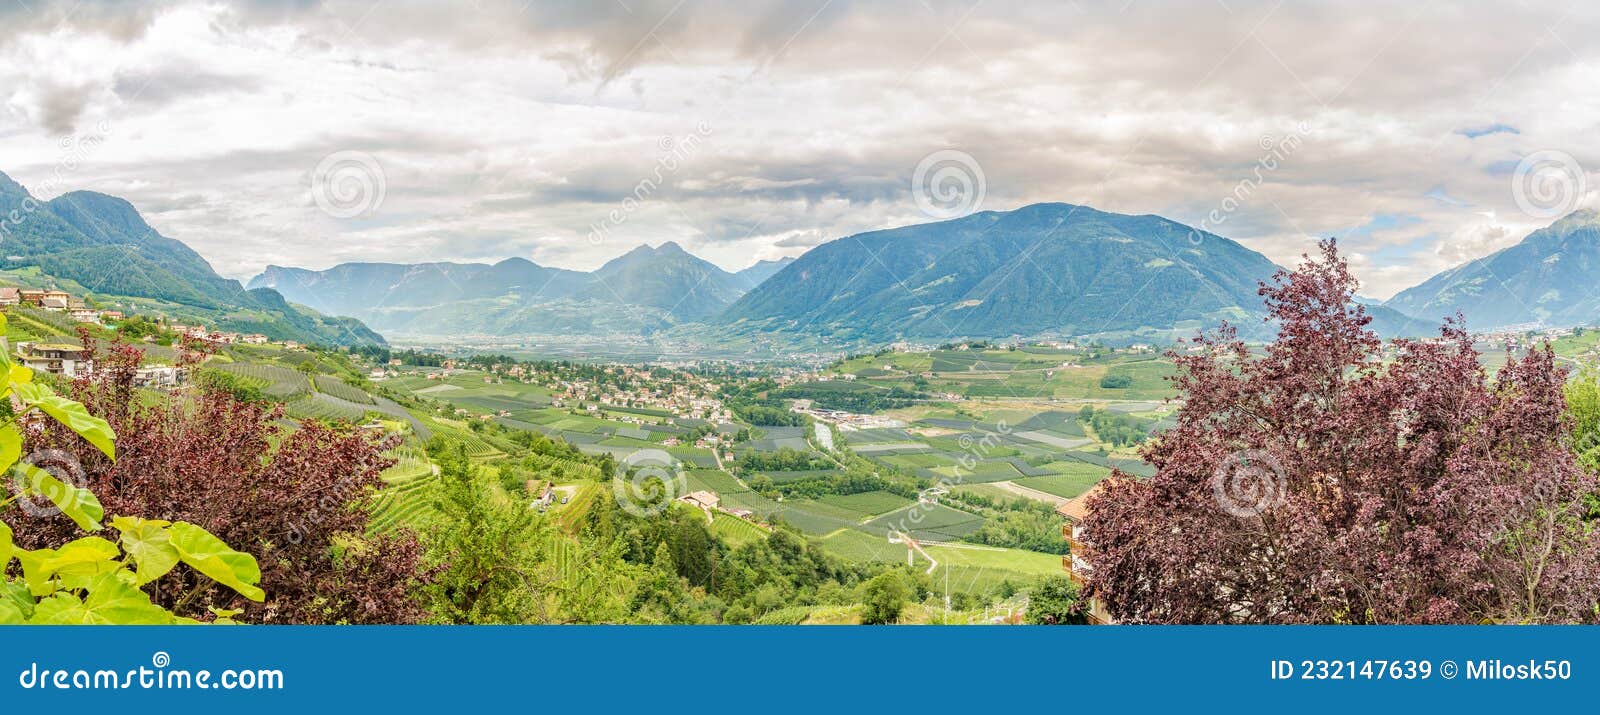 panoramic view at the scenery of nature from scena town in italy